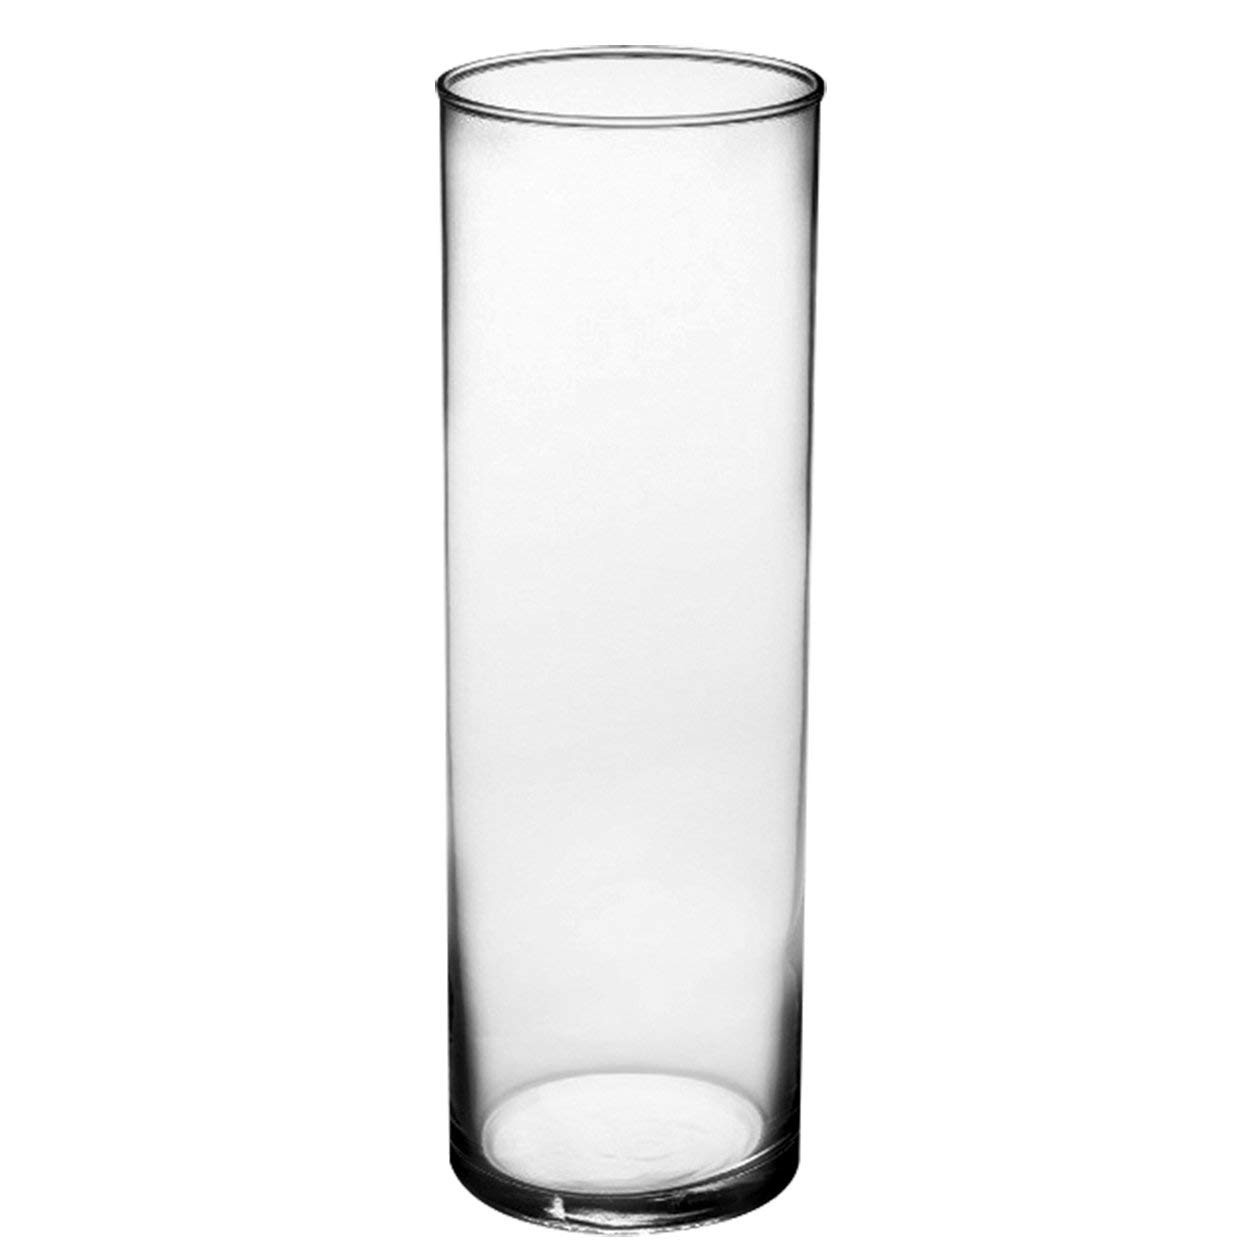 17 Ideal 6 X 12 Glass Cylinder Vase 2024 free download 6 x 12 glass cylinder vase of amazon com syndicate sales 3 1 2 x 10 1 2 cylinder vase clear with amazon com syndicate sales 3 1 2 x 10 1 2 cylinder vase clear planters garden outdoor